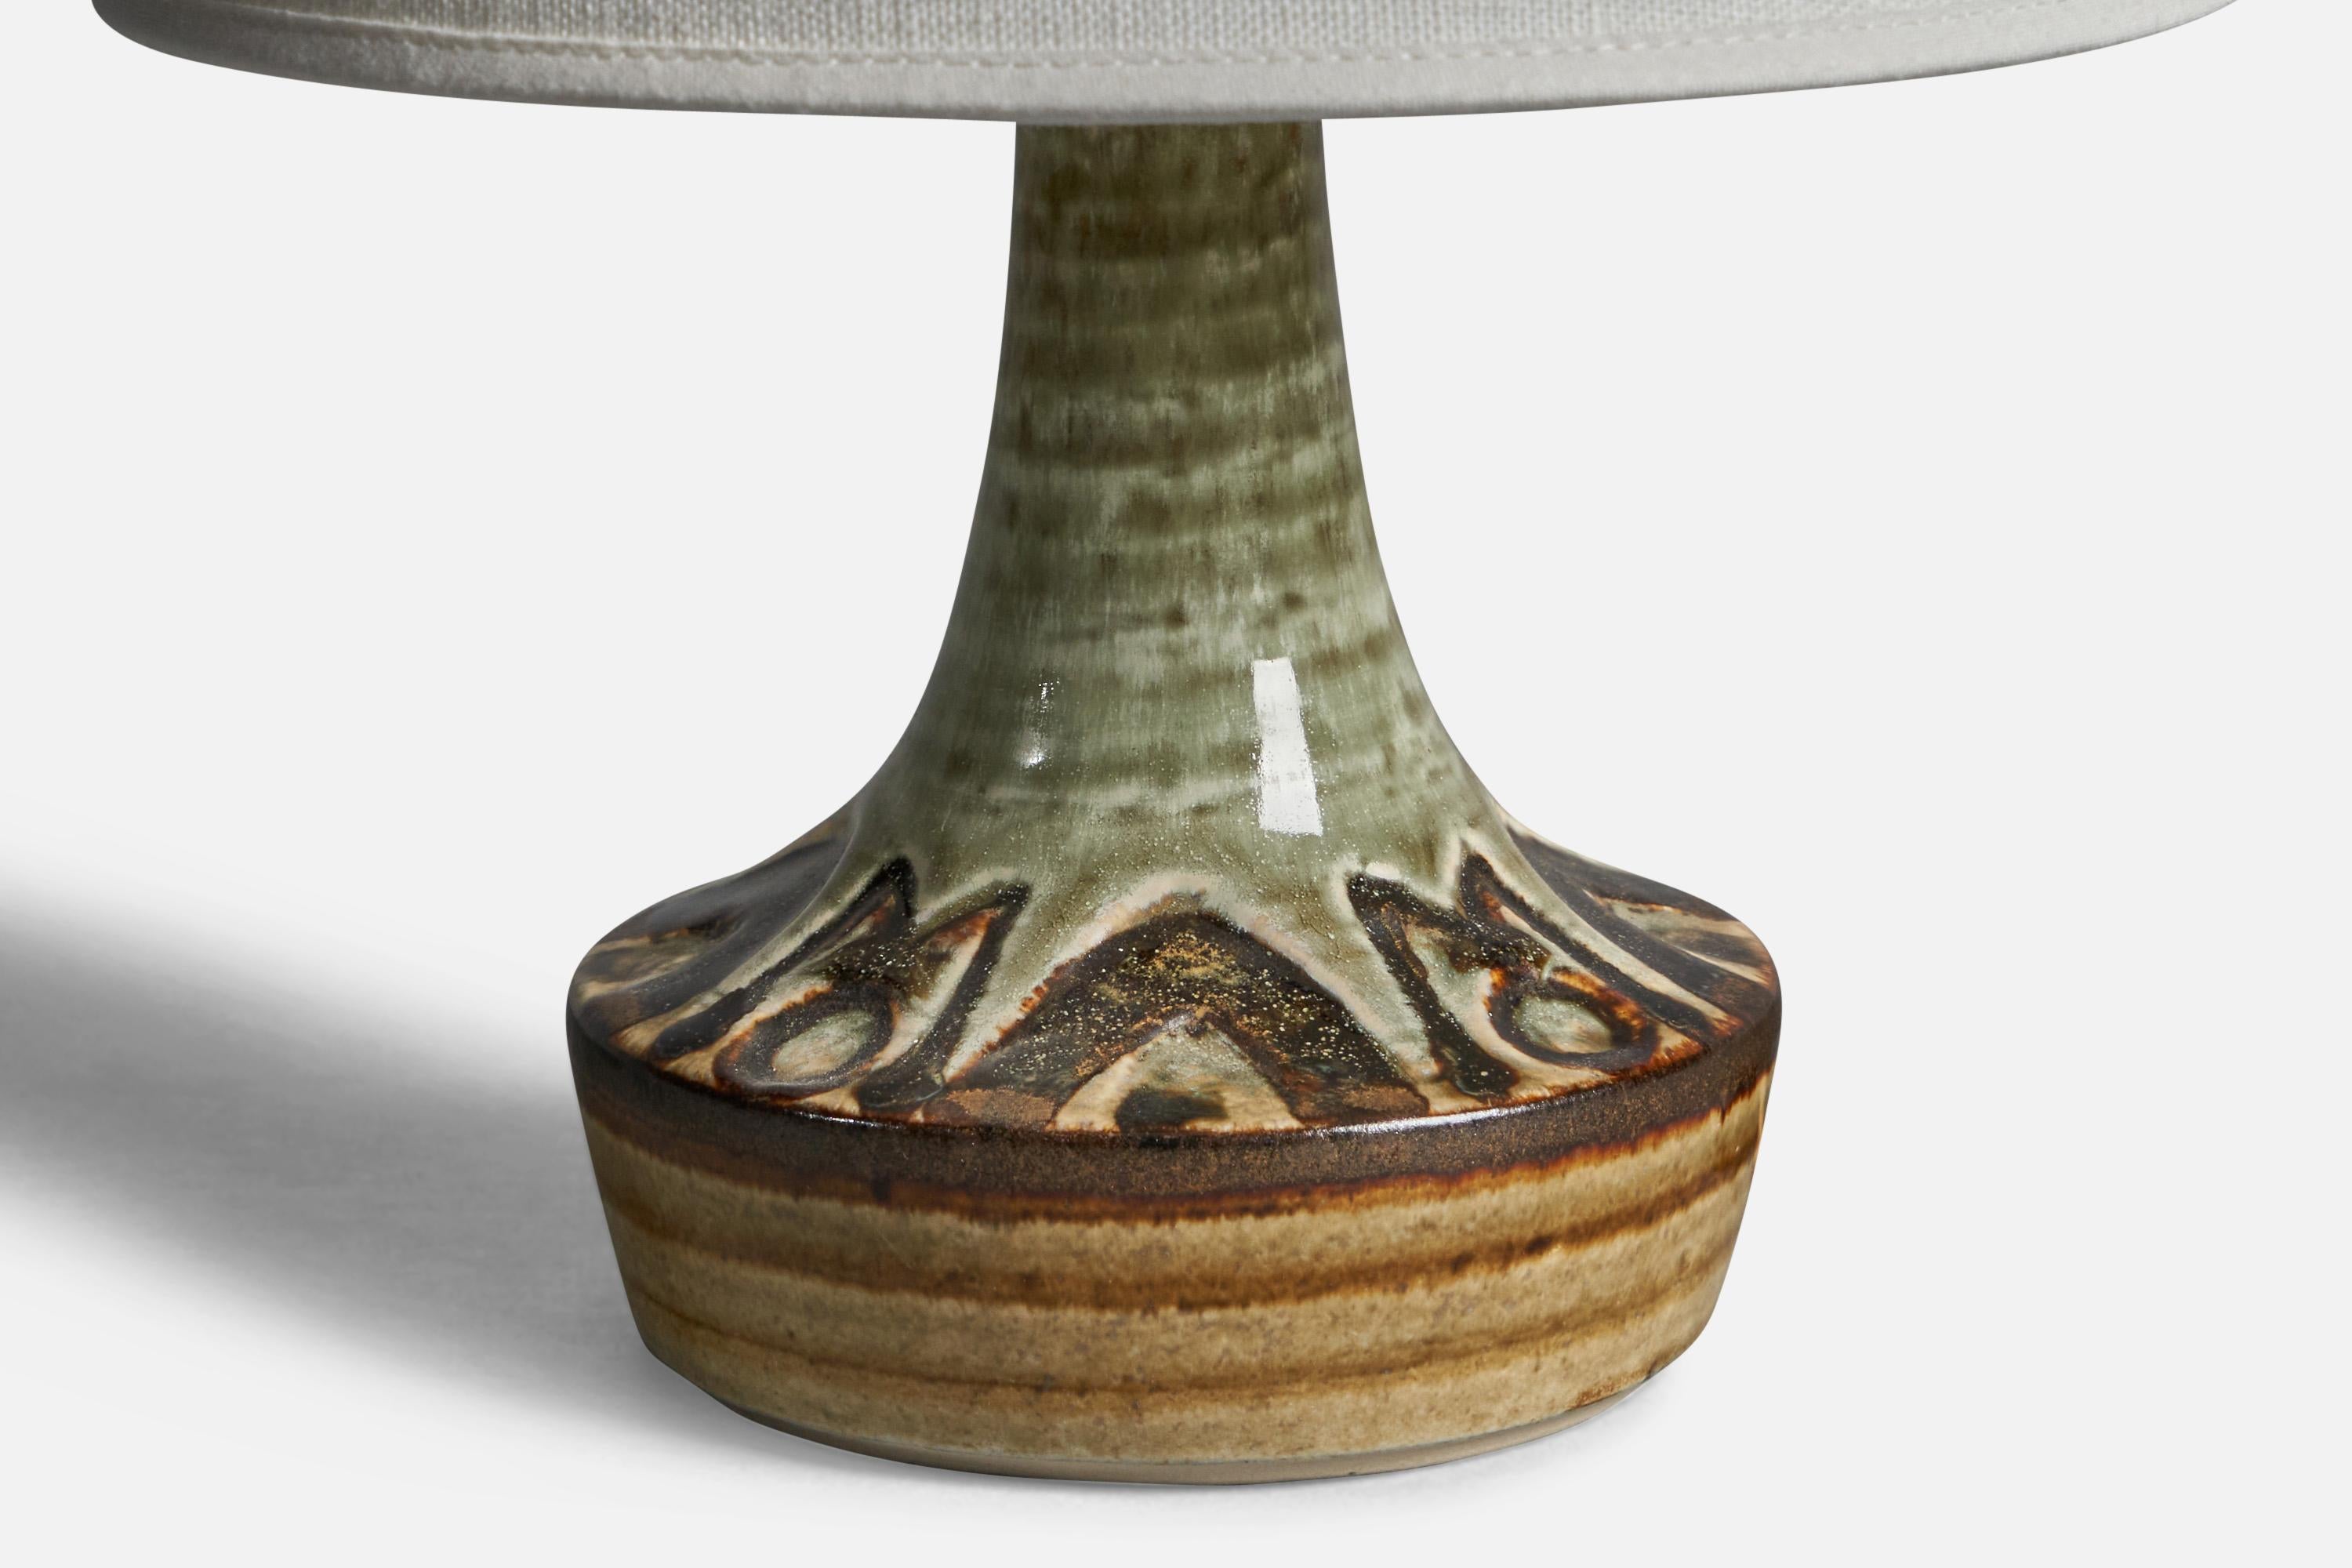 A green-glazed stoneware table lamp designed and produced by  Søholm, Bornholm, Denmark, 1960s.

Dimensions of Lamp (inches): 7.75